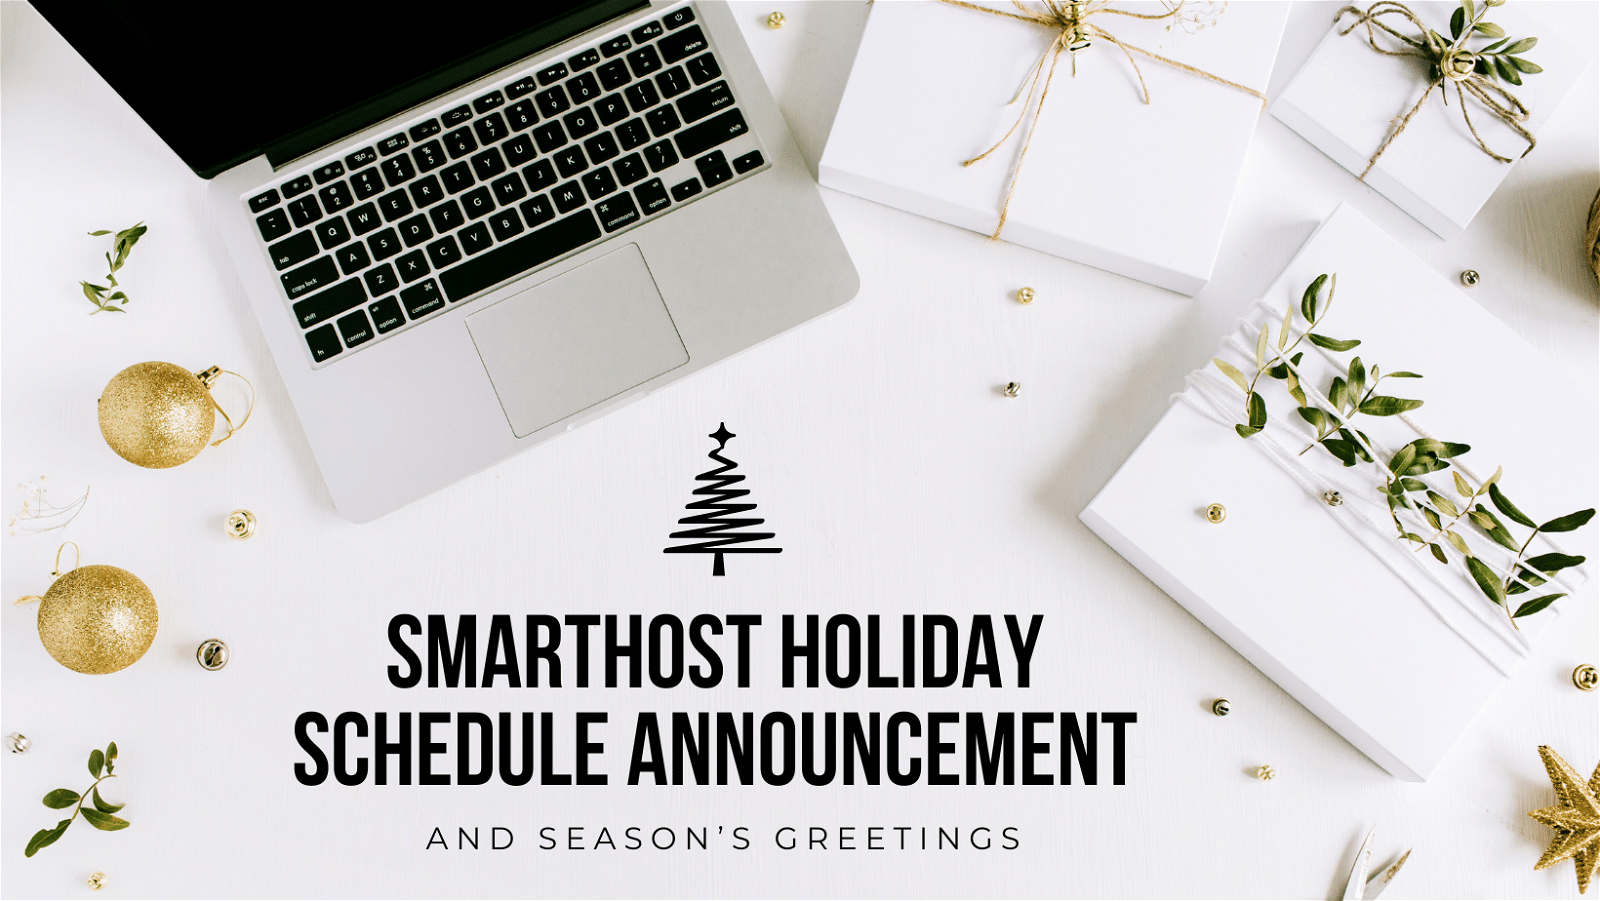 Smartest Christmas and New Year 2023 schedule announcement and season's greetings.